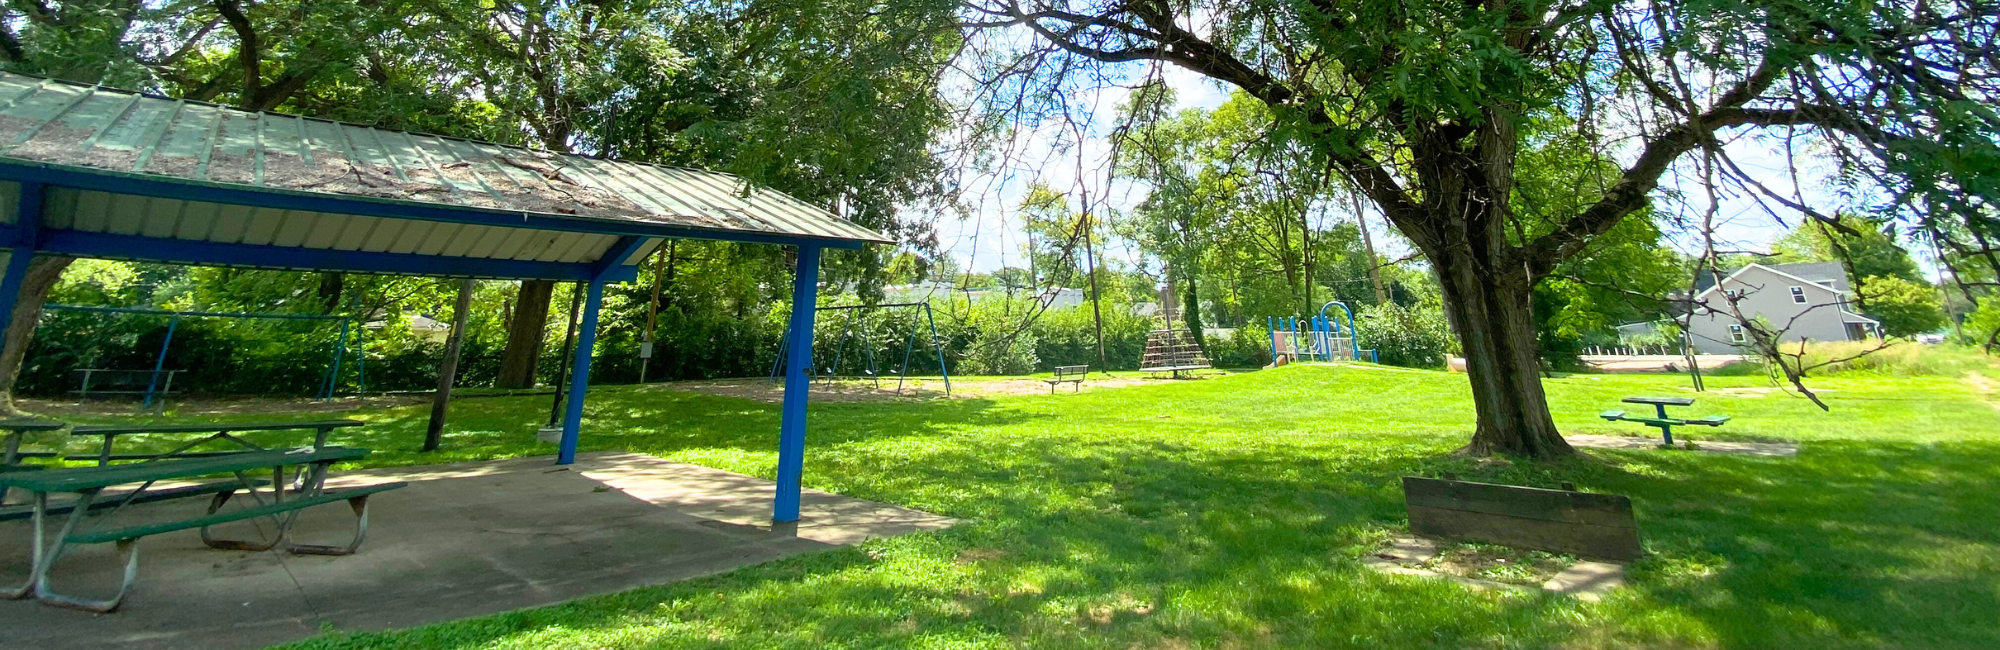 Park with shelter, tree and a playground in the distance